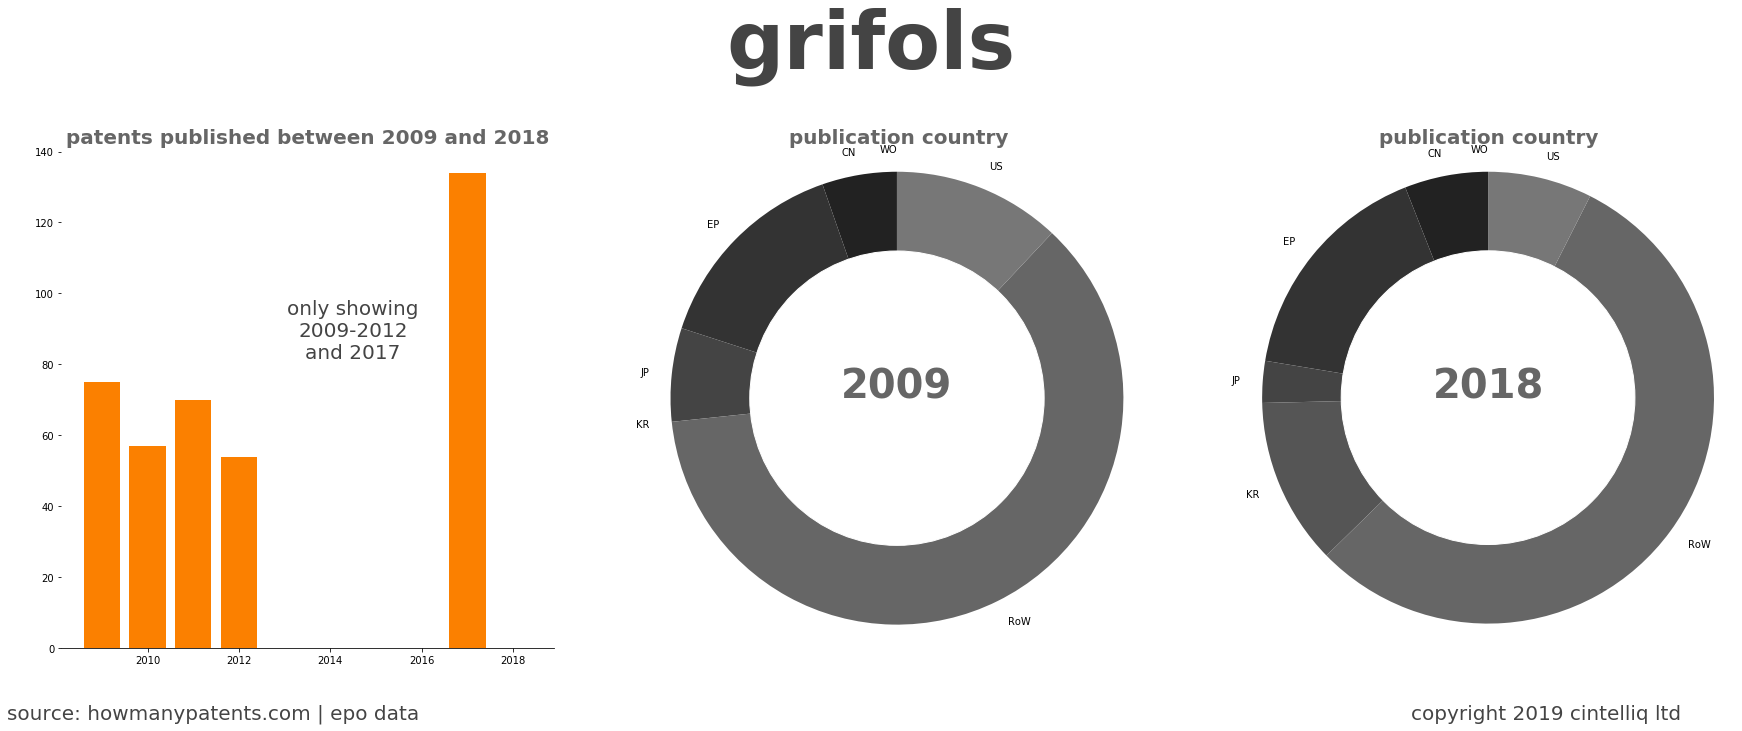 summary of patents for Grifols